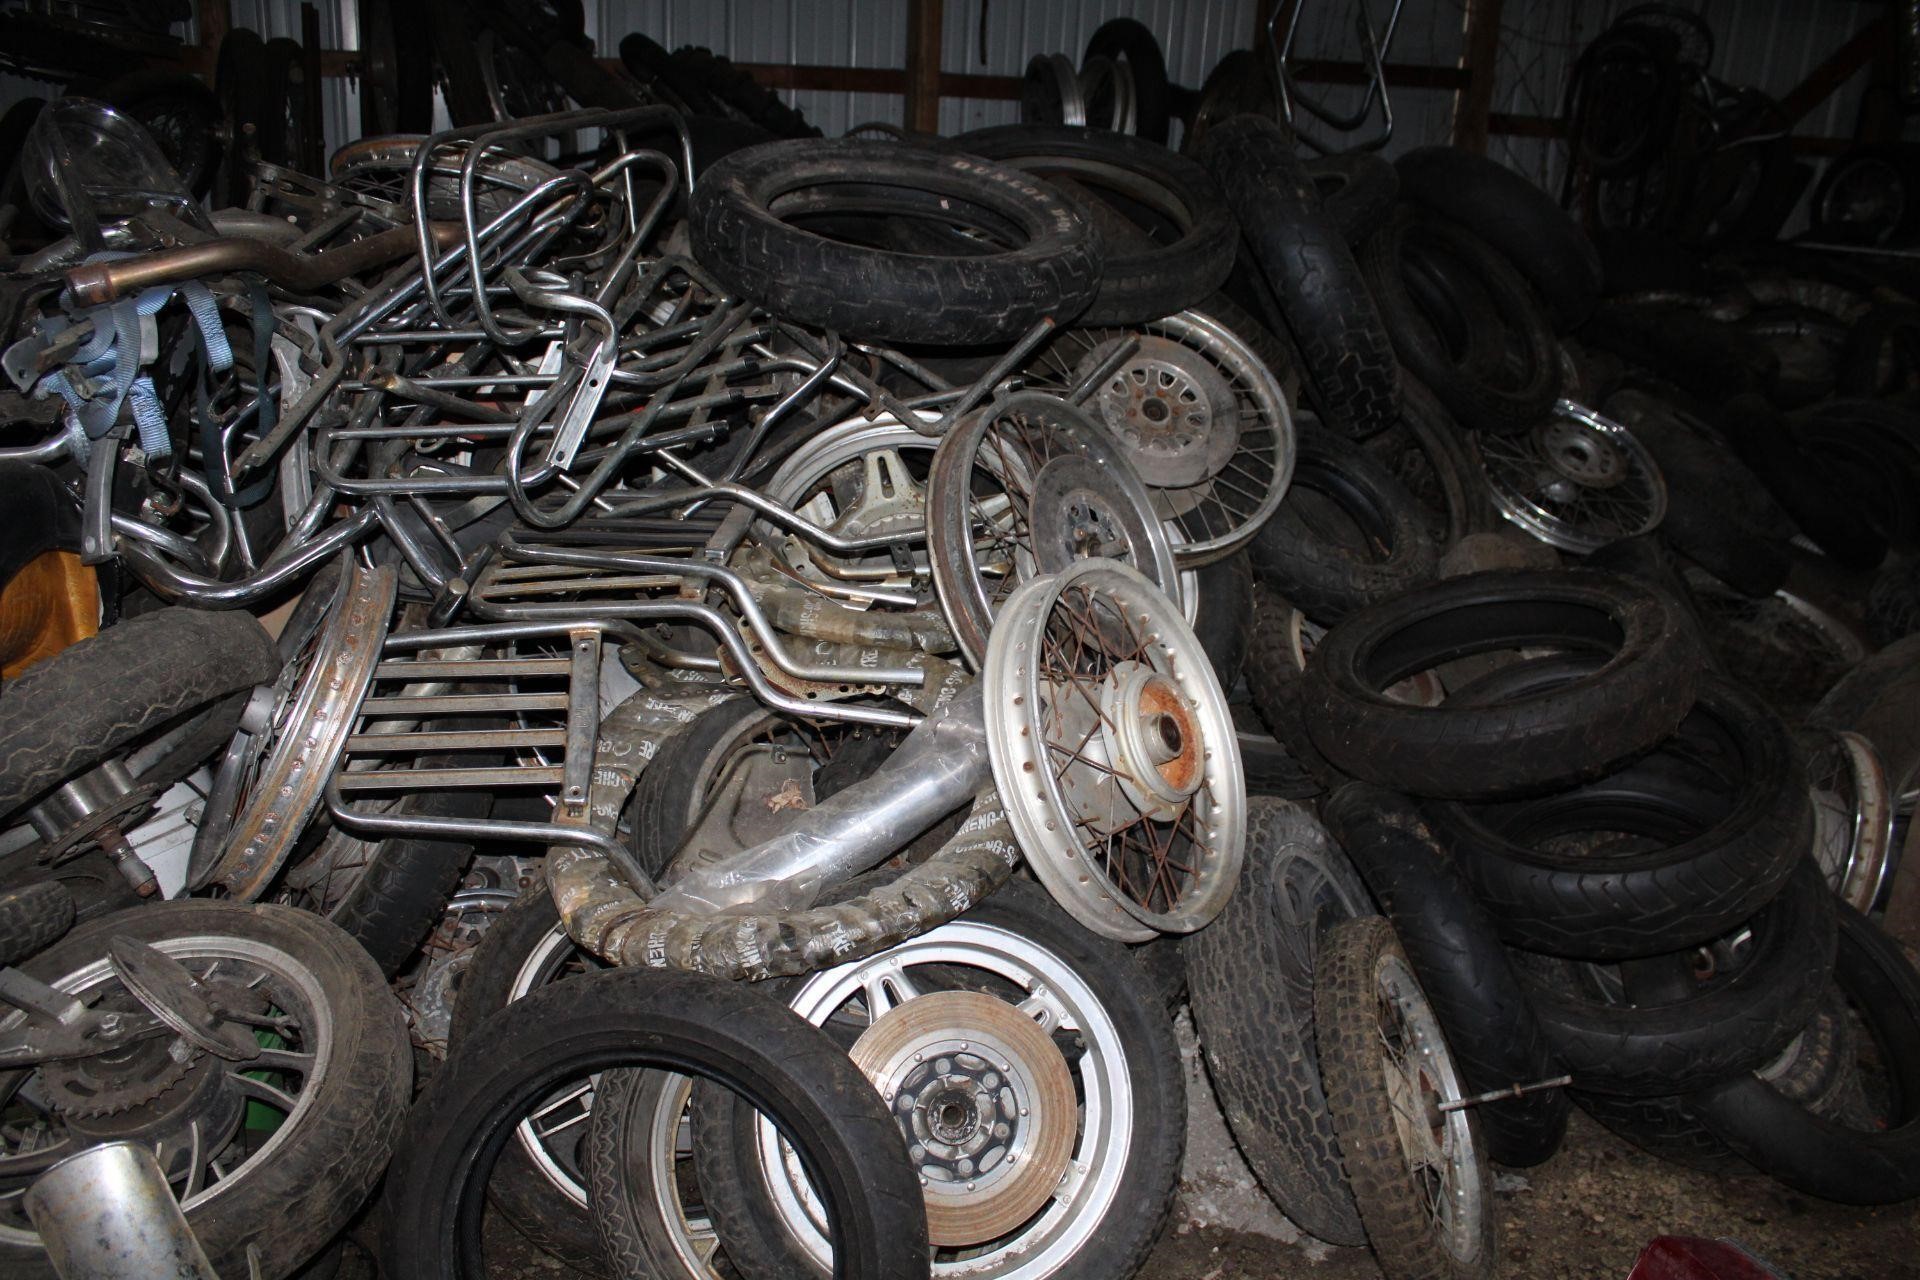 10 FOR THE MONEY-TIRES-WHEELS-RACKS-PARTS